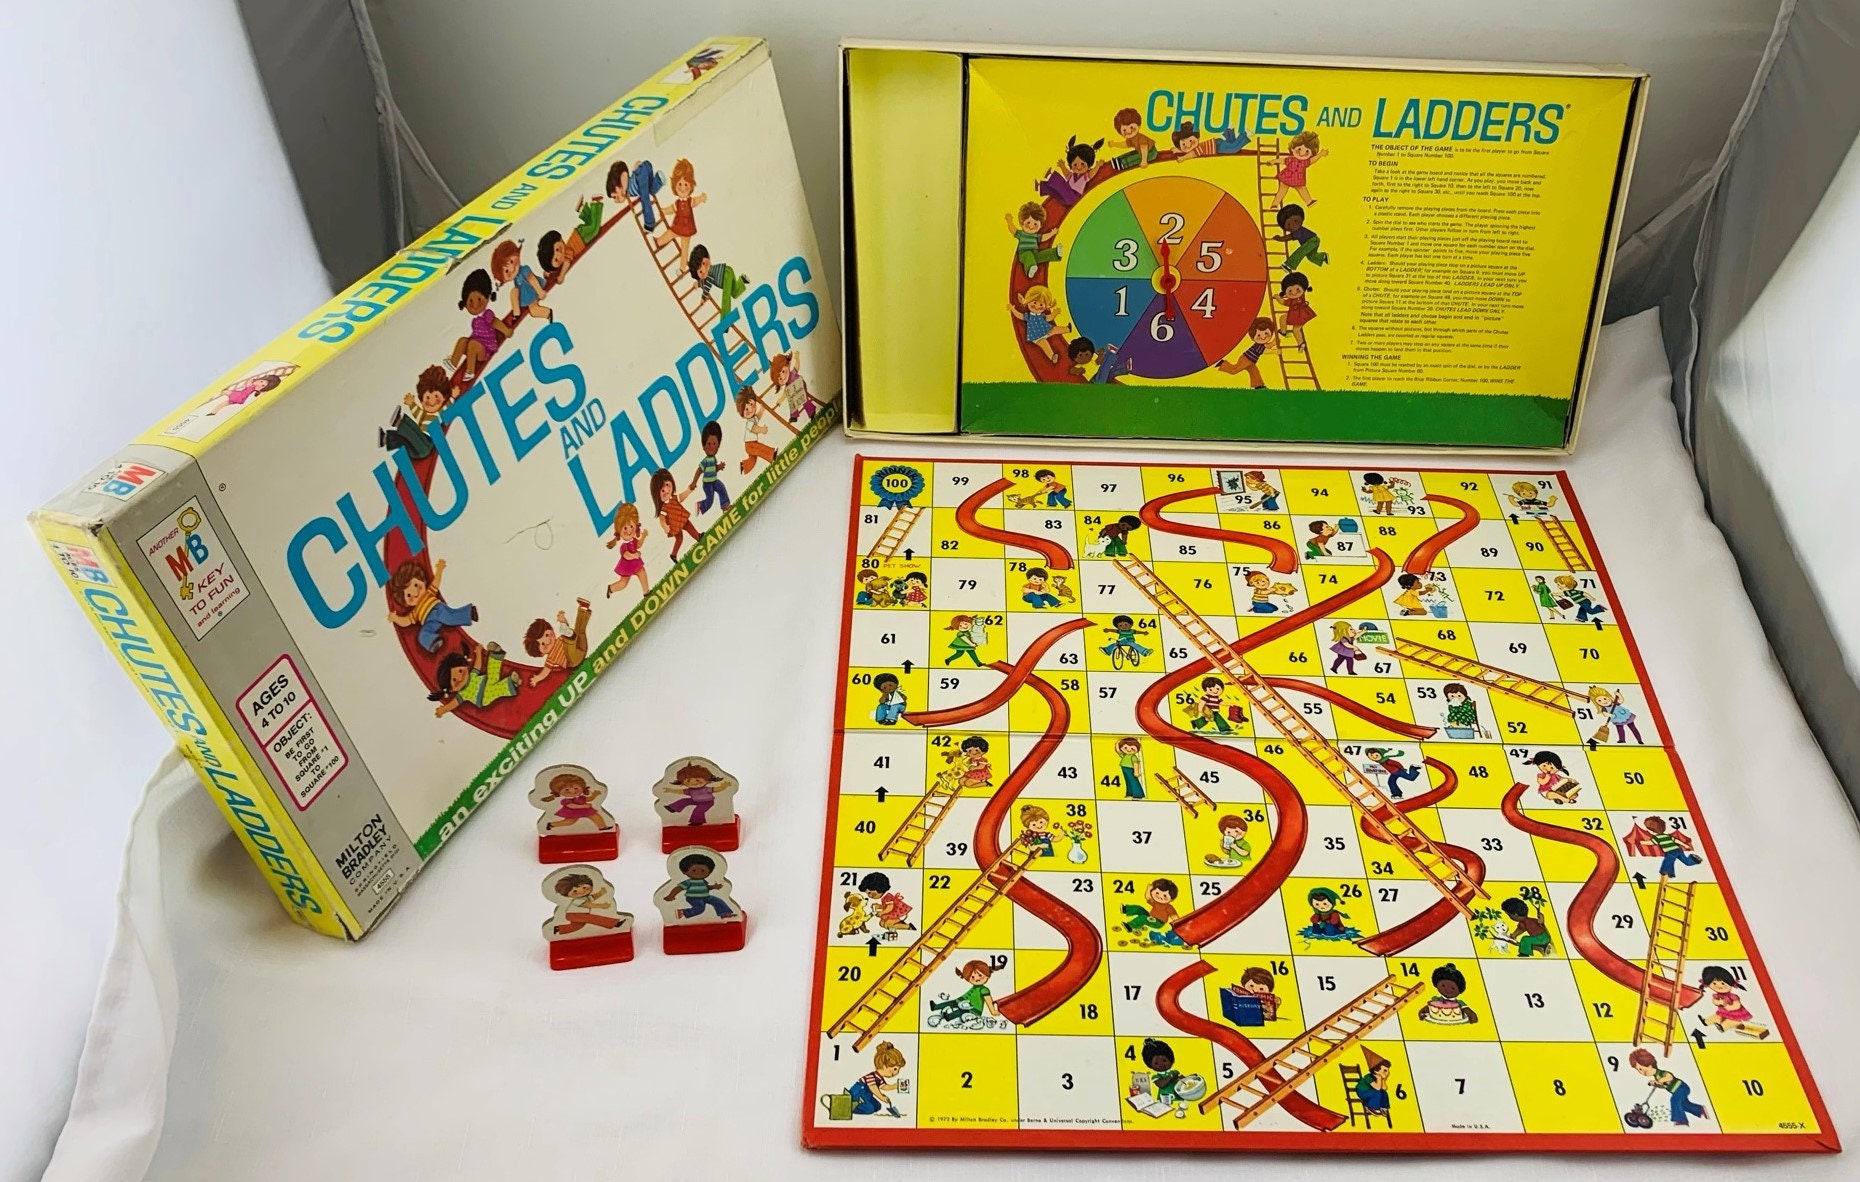 1974 Chutes and Ladders Game by Milton Bradley Complete in Great Condition  FREE SHIPPING - Etsy